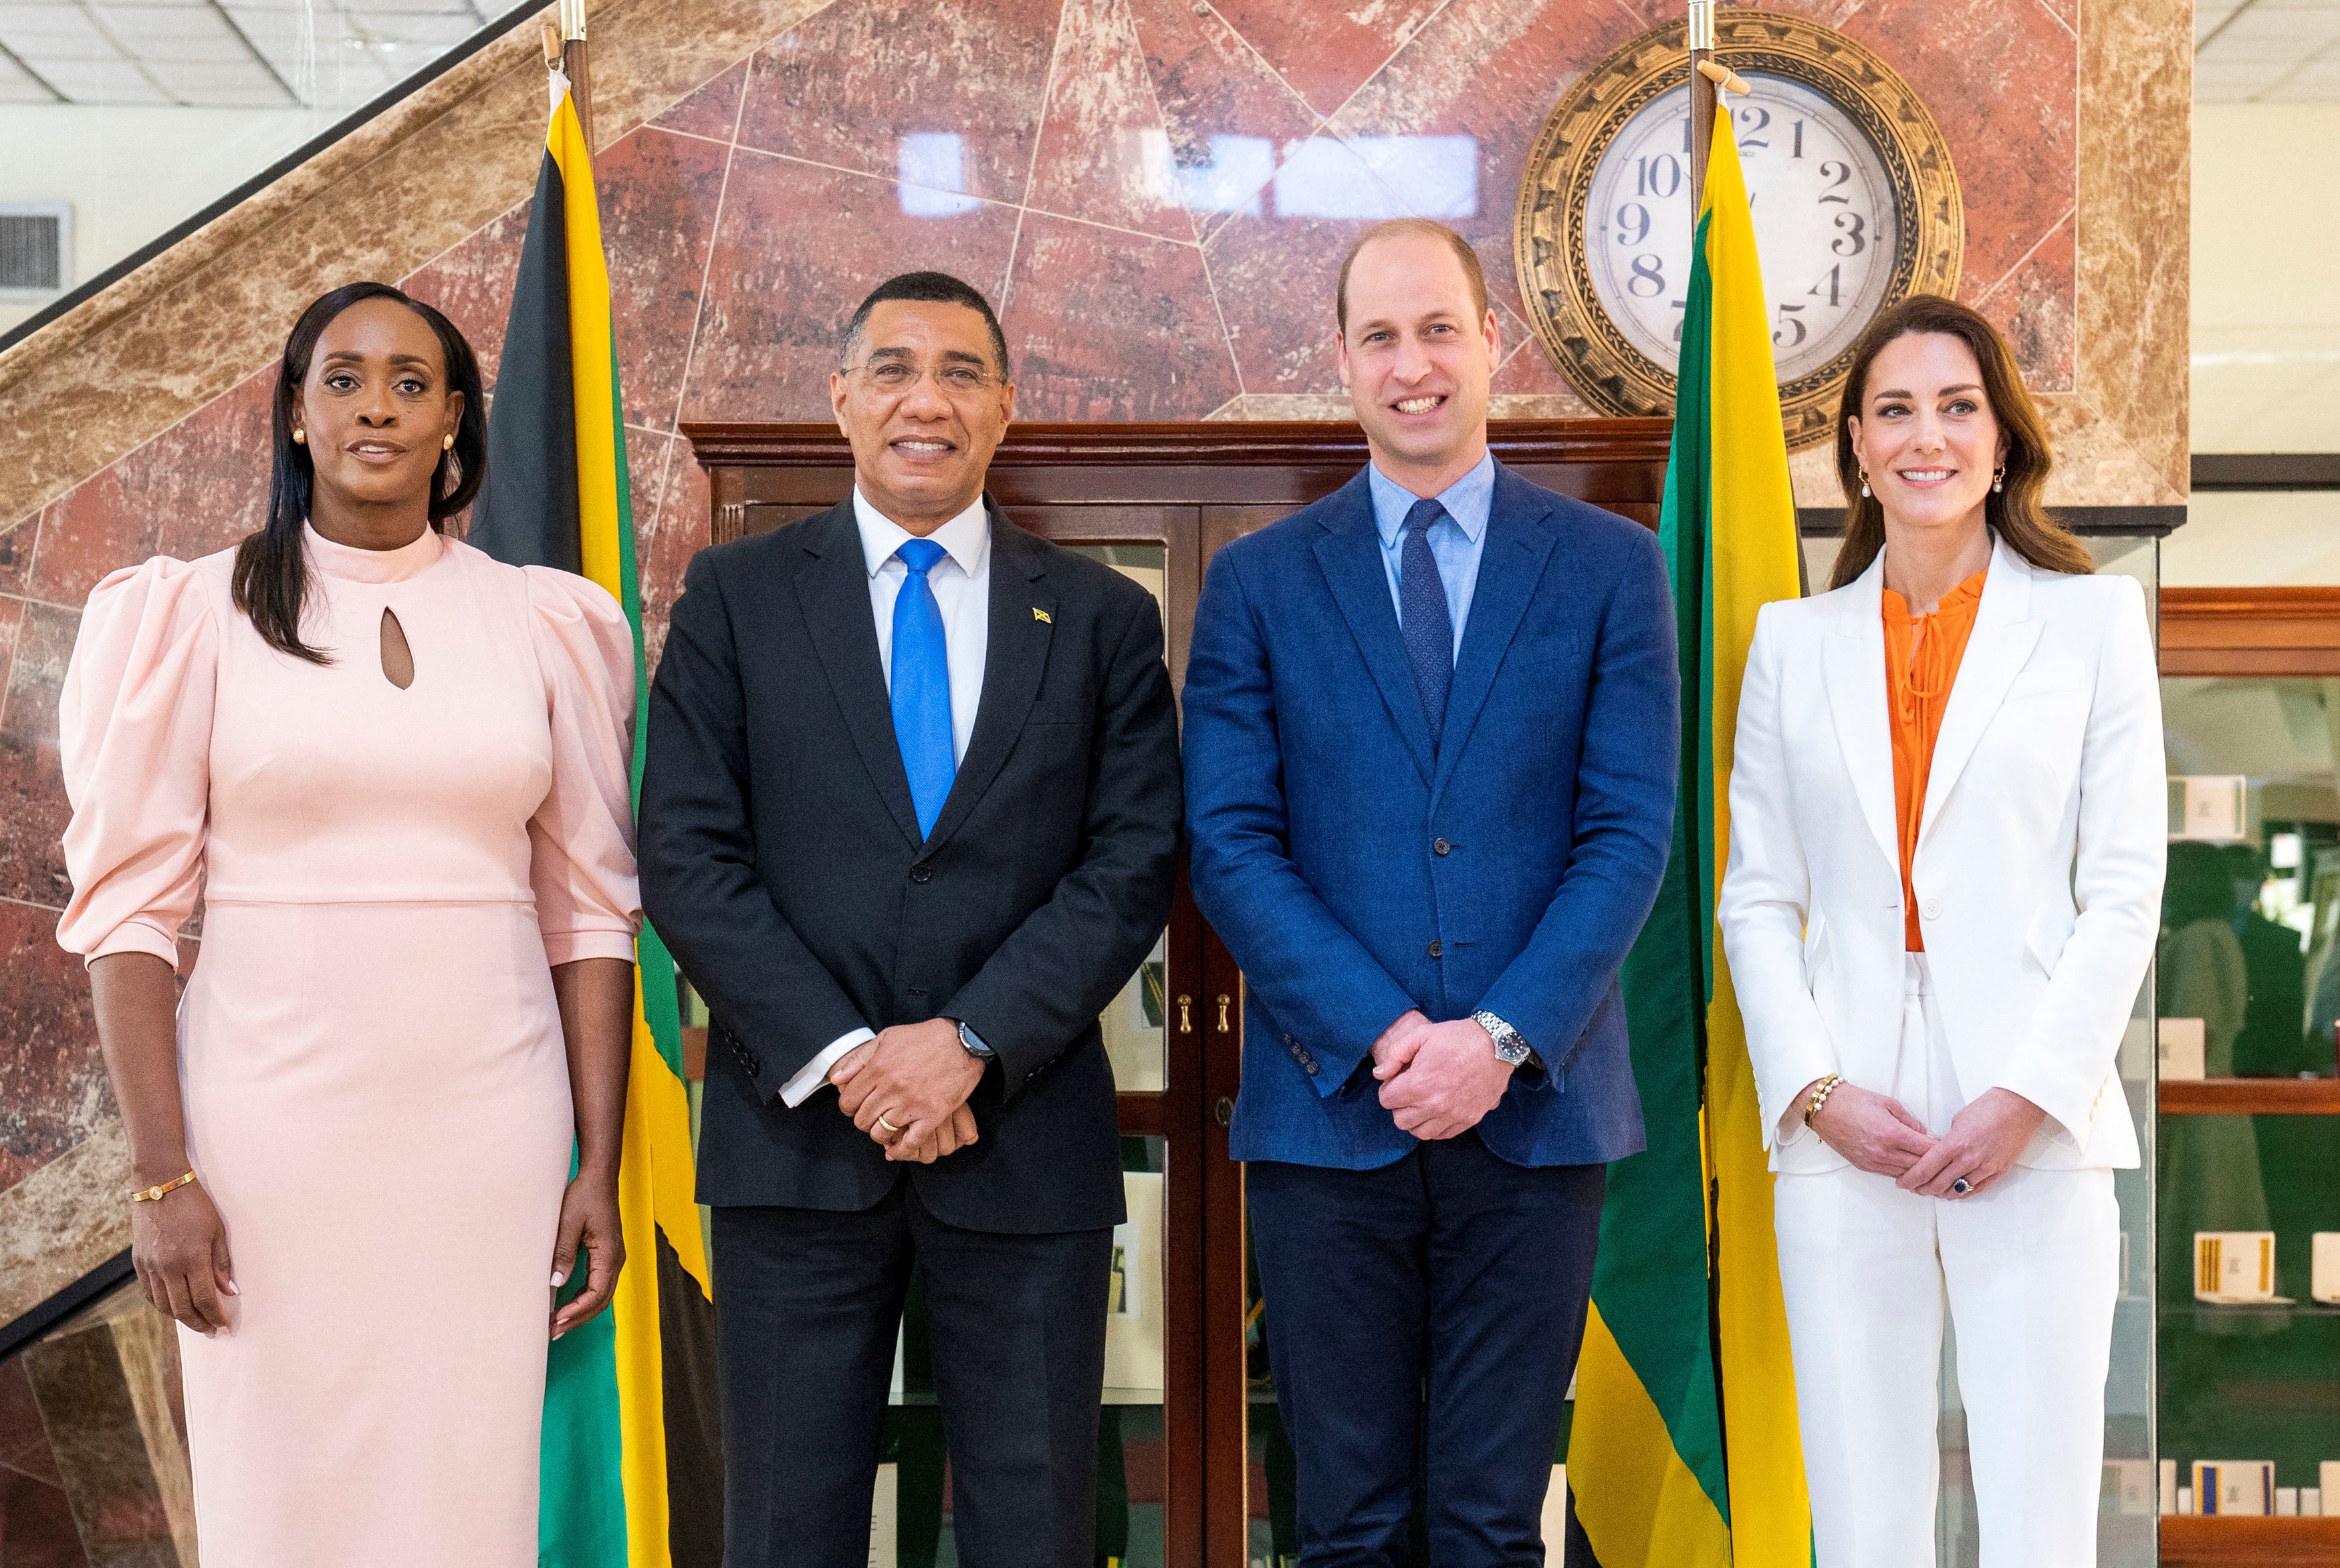 The Duke and Duchess of Cambridge tour of the Caribbean